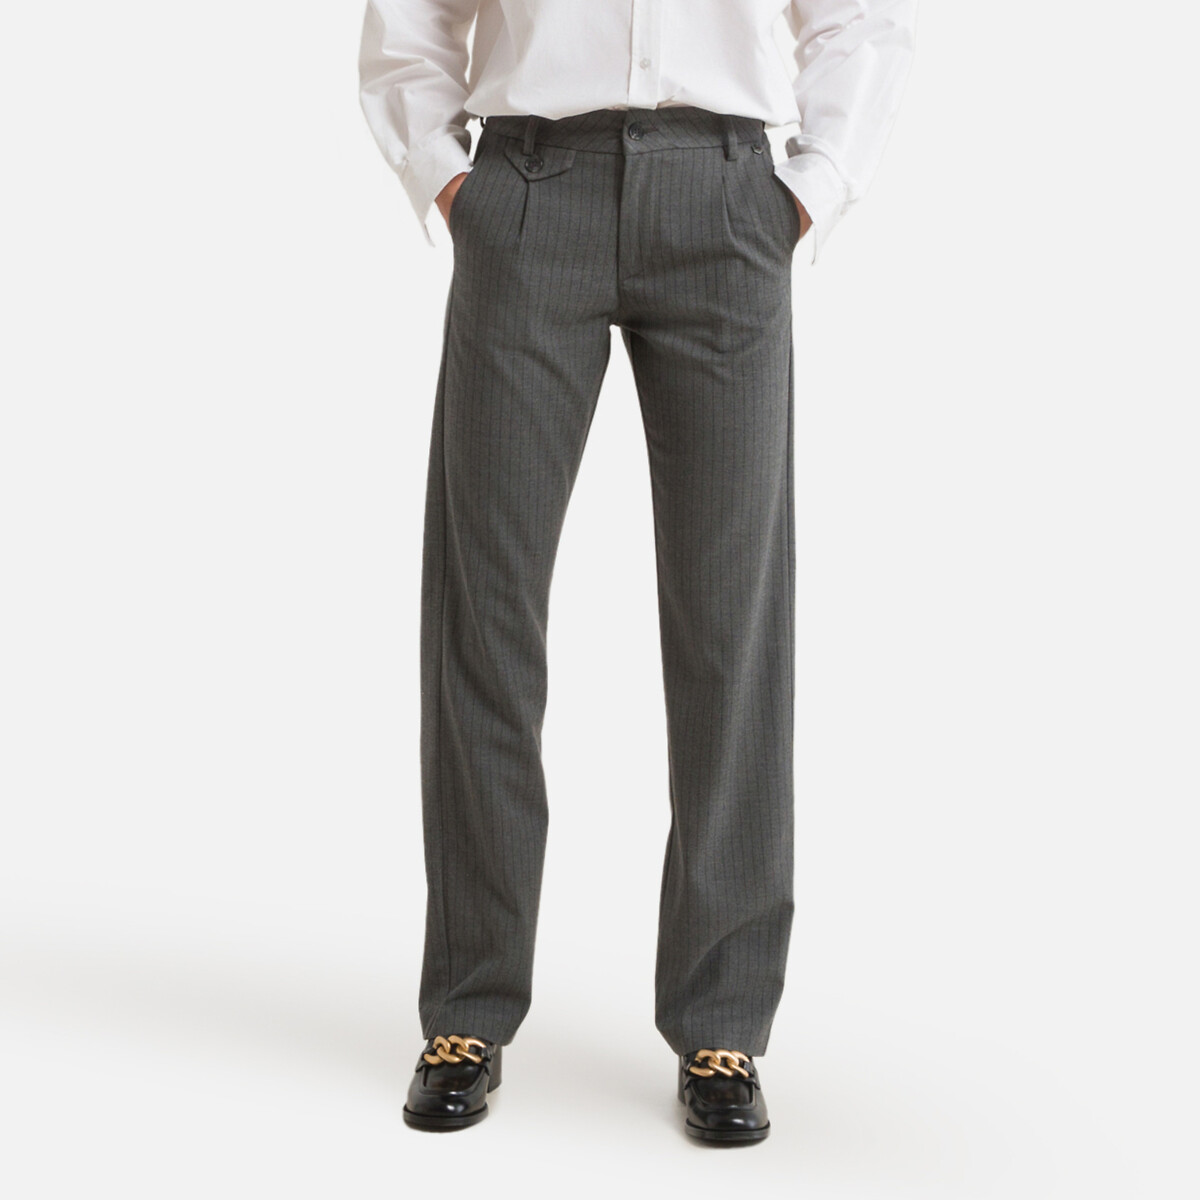 Straight Trousers, Length 32.5"